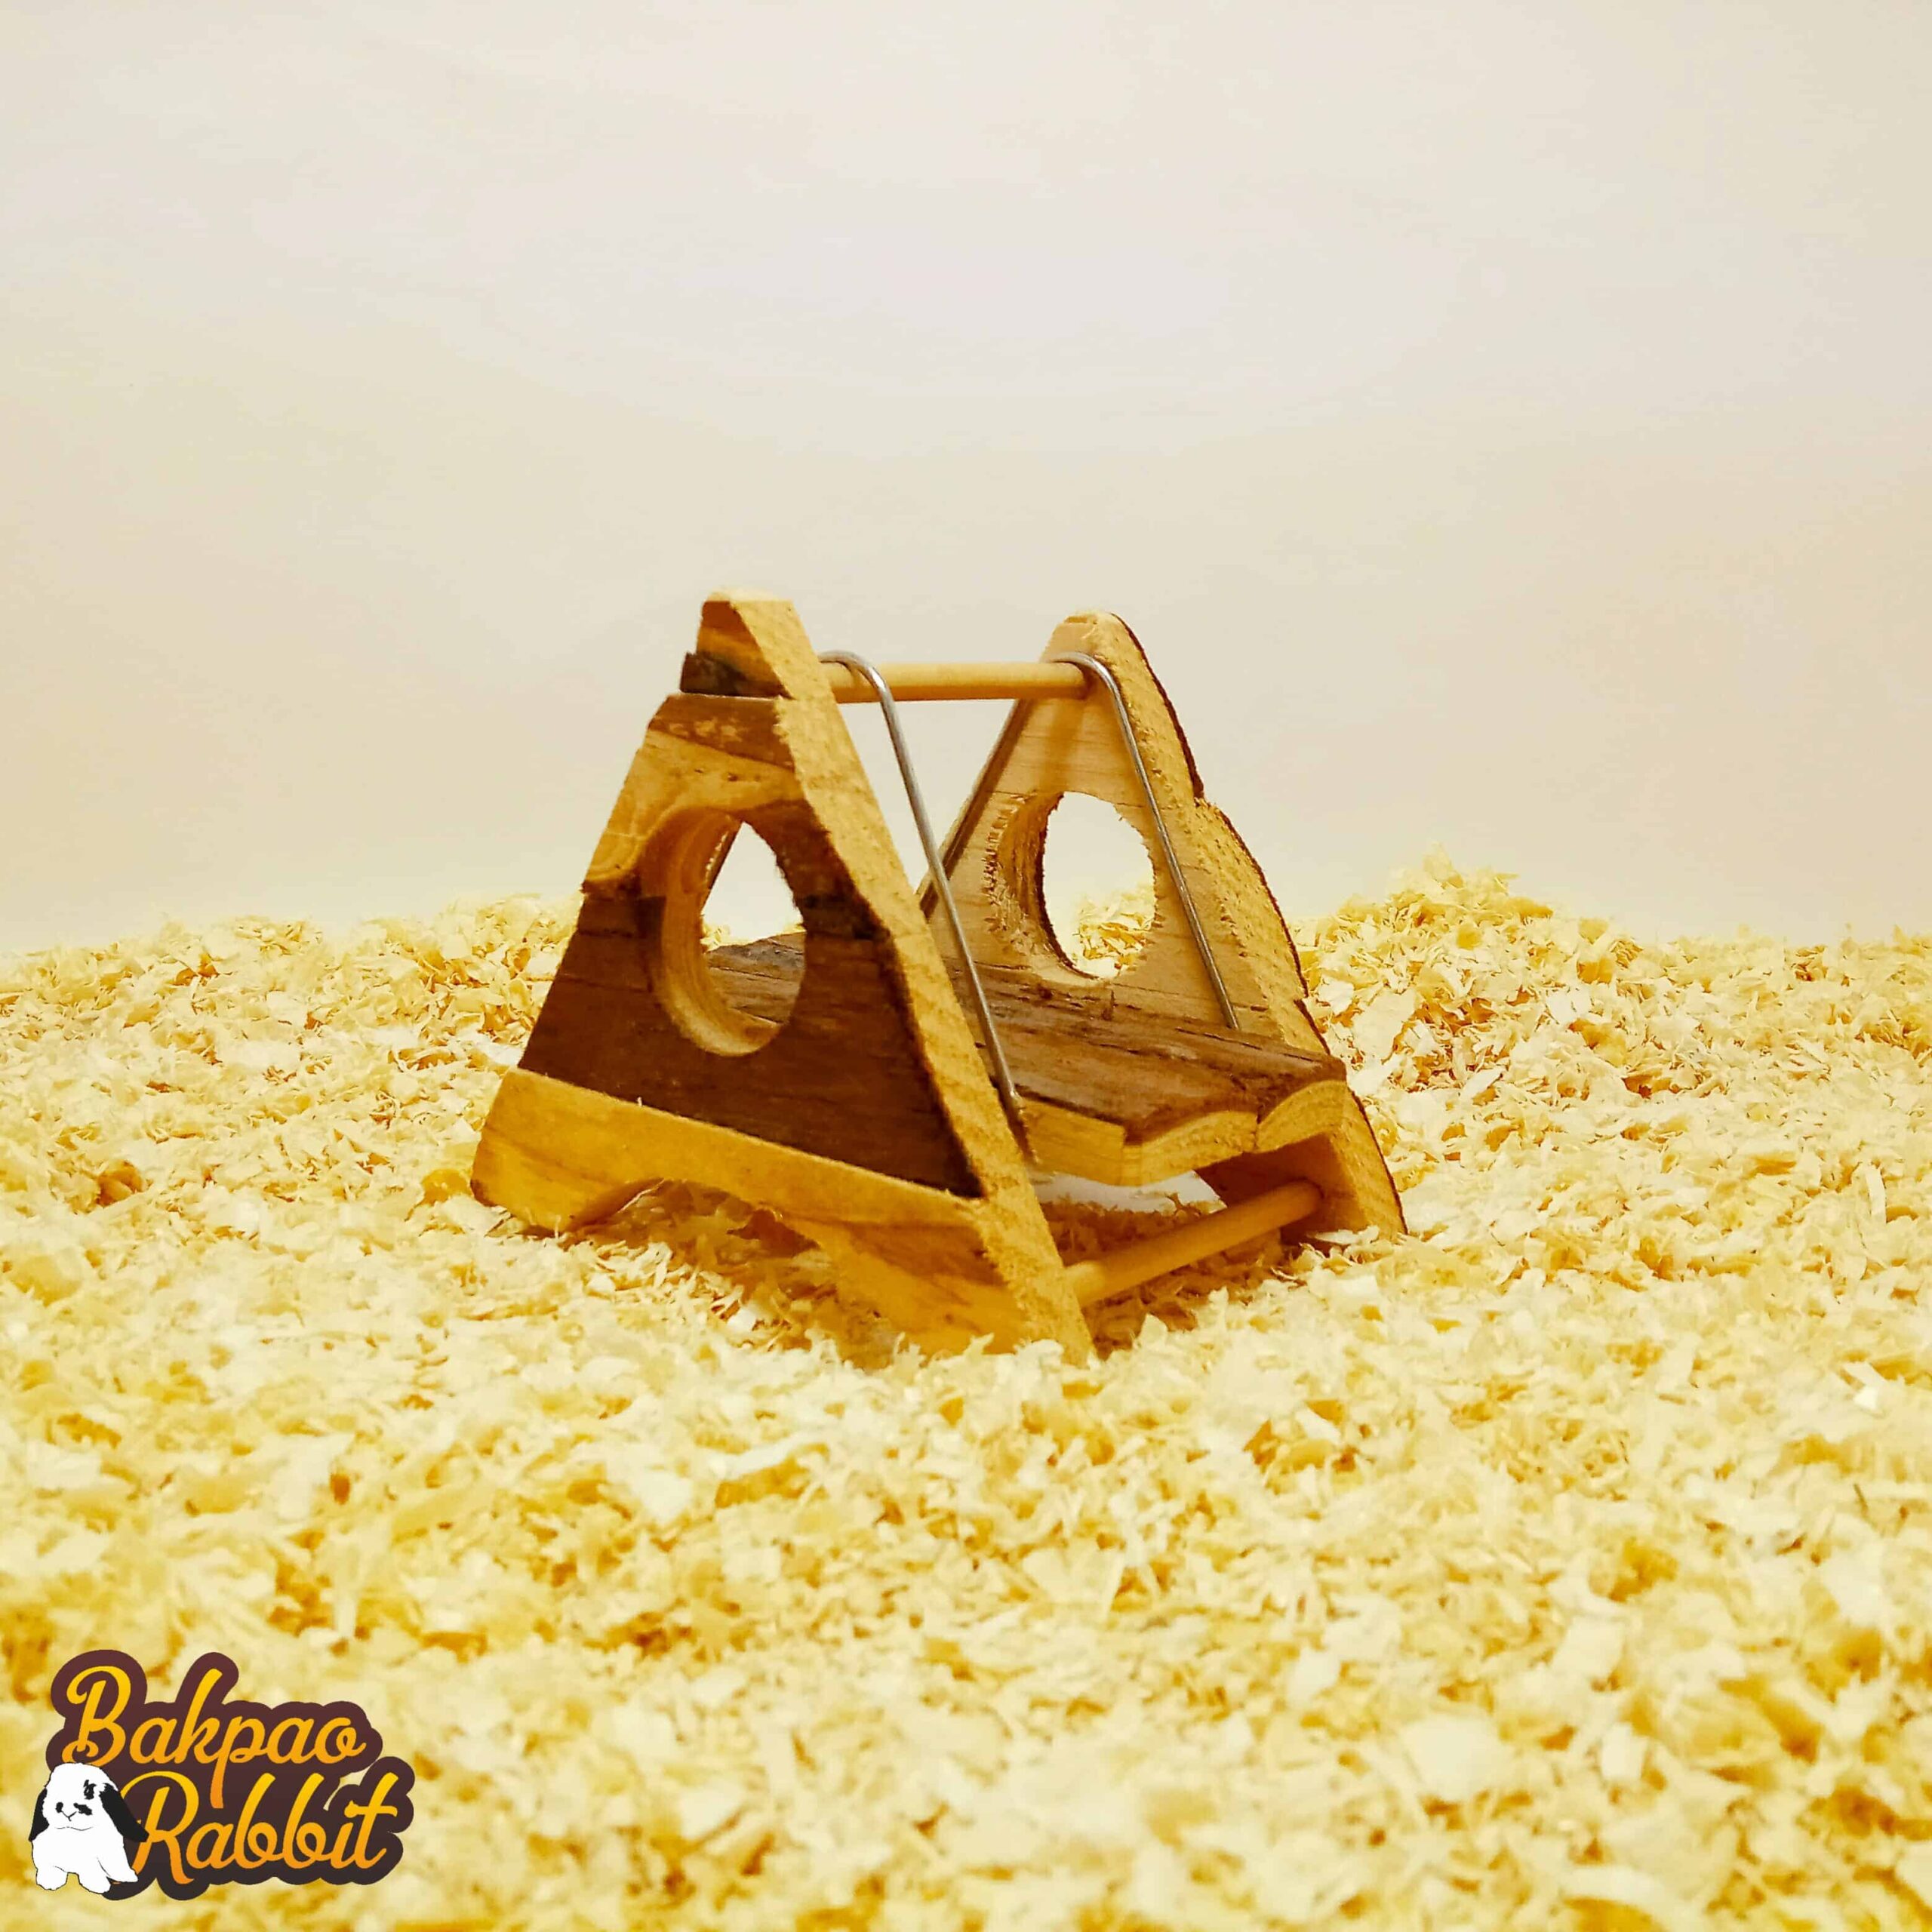 Alex AM087 Wooden Swing For Hamster